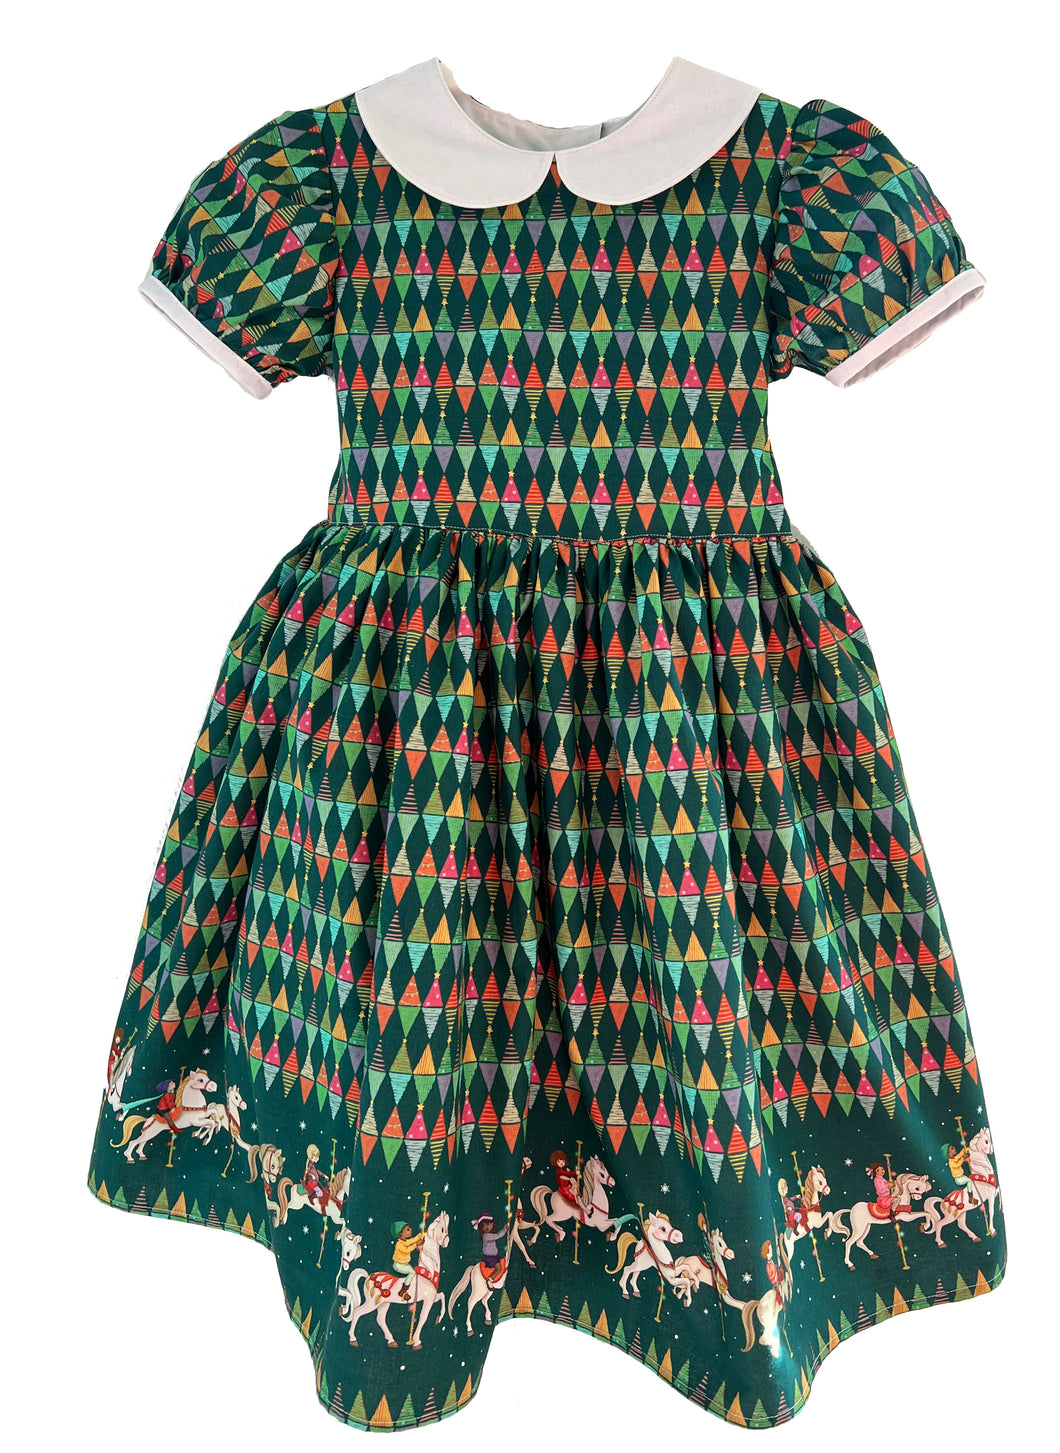 Made to Order Child's Christmas Carousel Party Dress Sizes 18m-10y